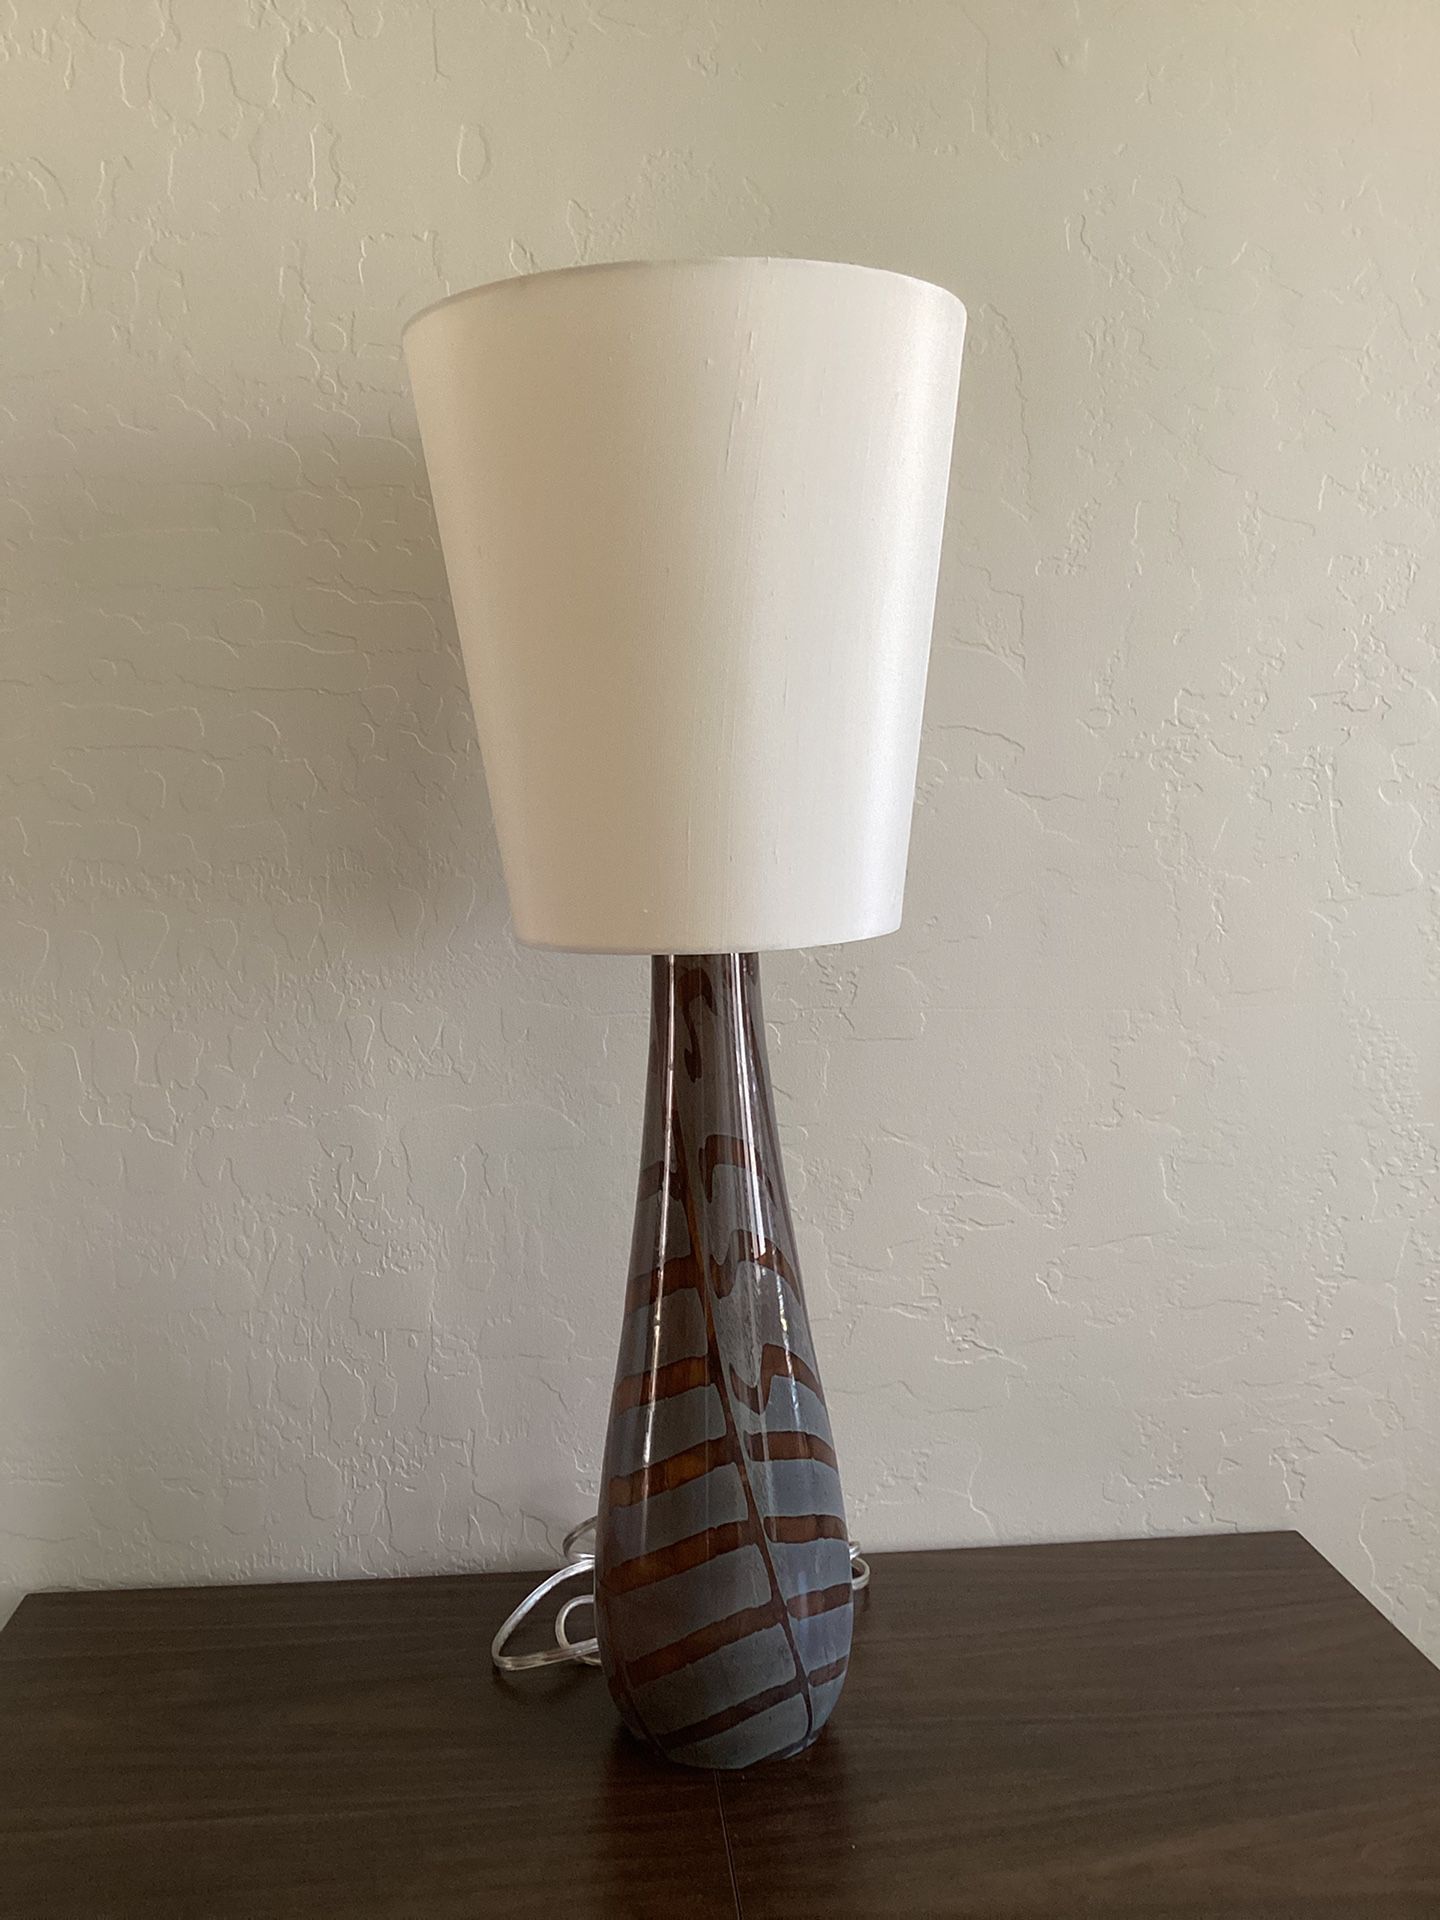 27” Glass Table Lamp w/Shade